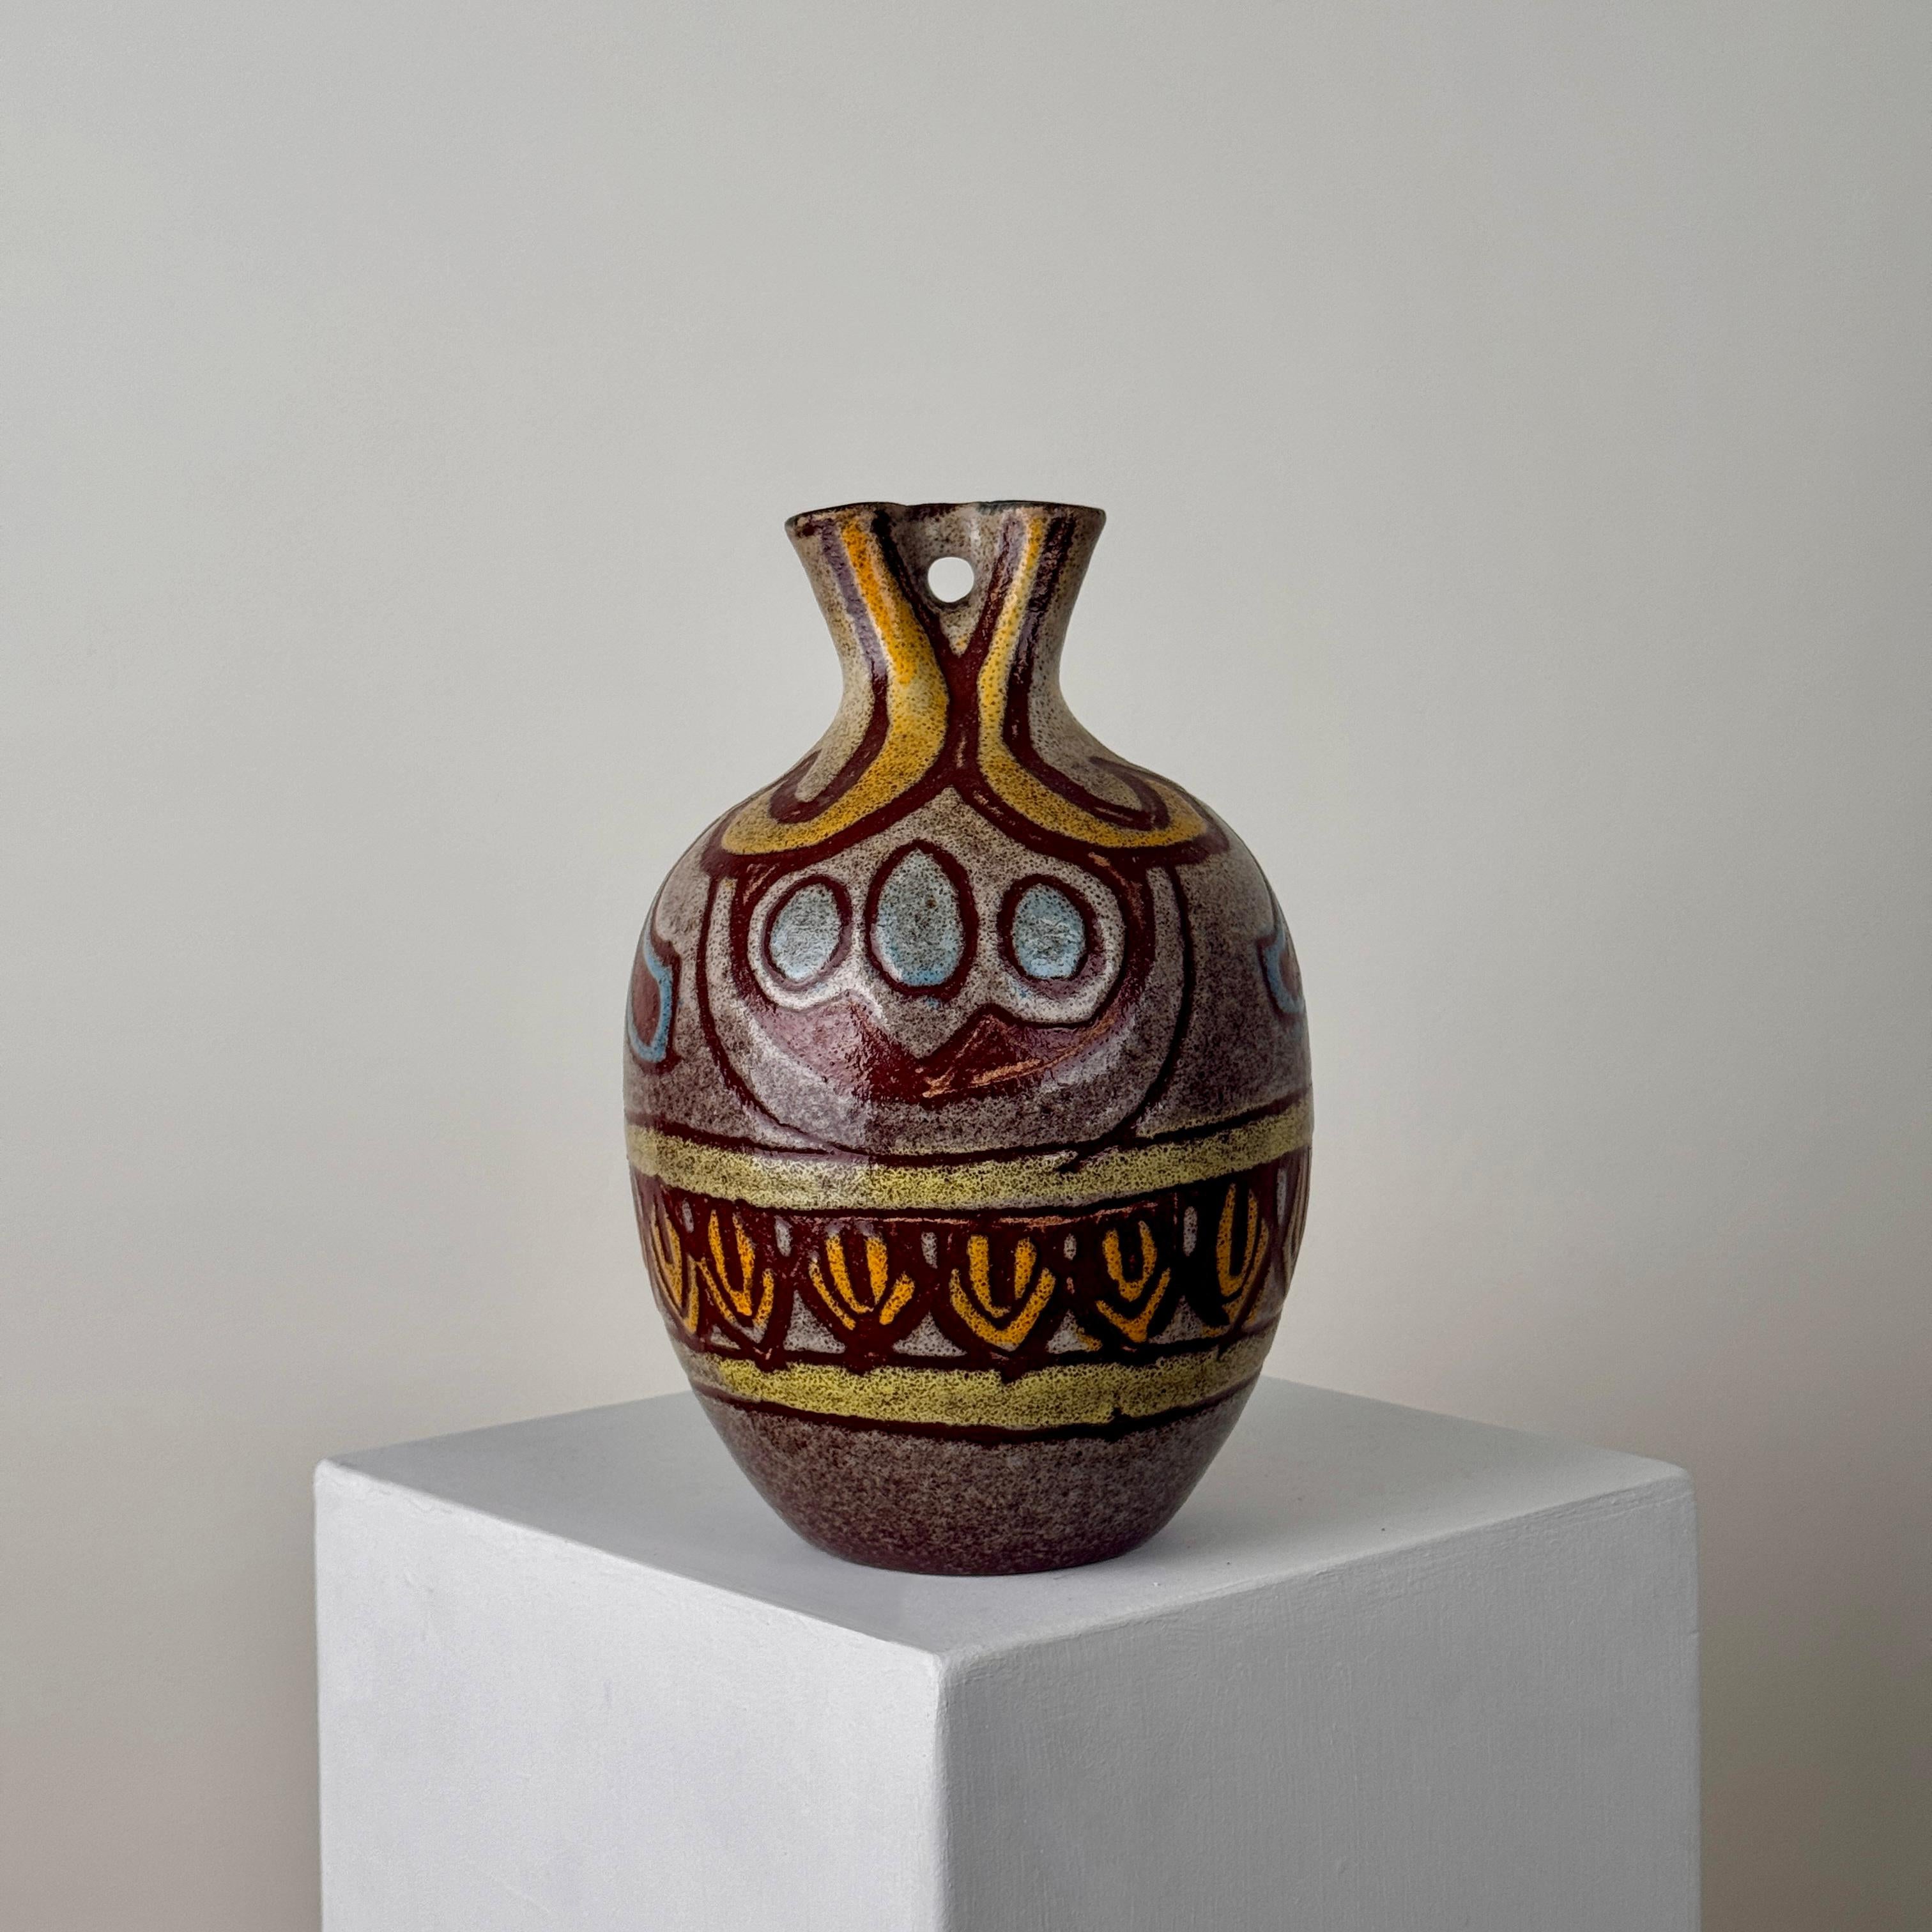 Imposing double-necked vase with Africanist decoration, by the Accolay potters, Accolay, circa 1960.

Perfect condition.

H29cm D18cm.
